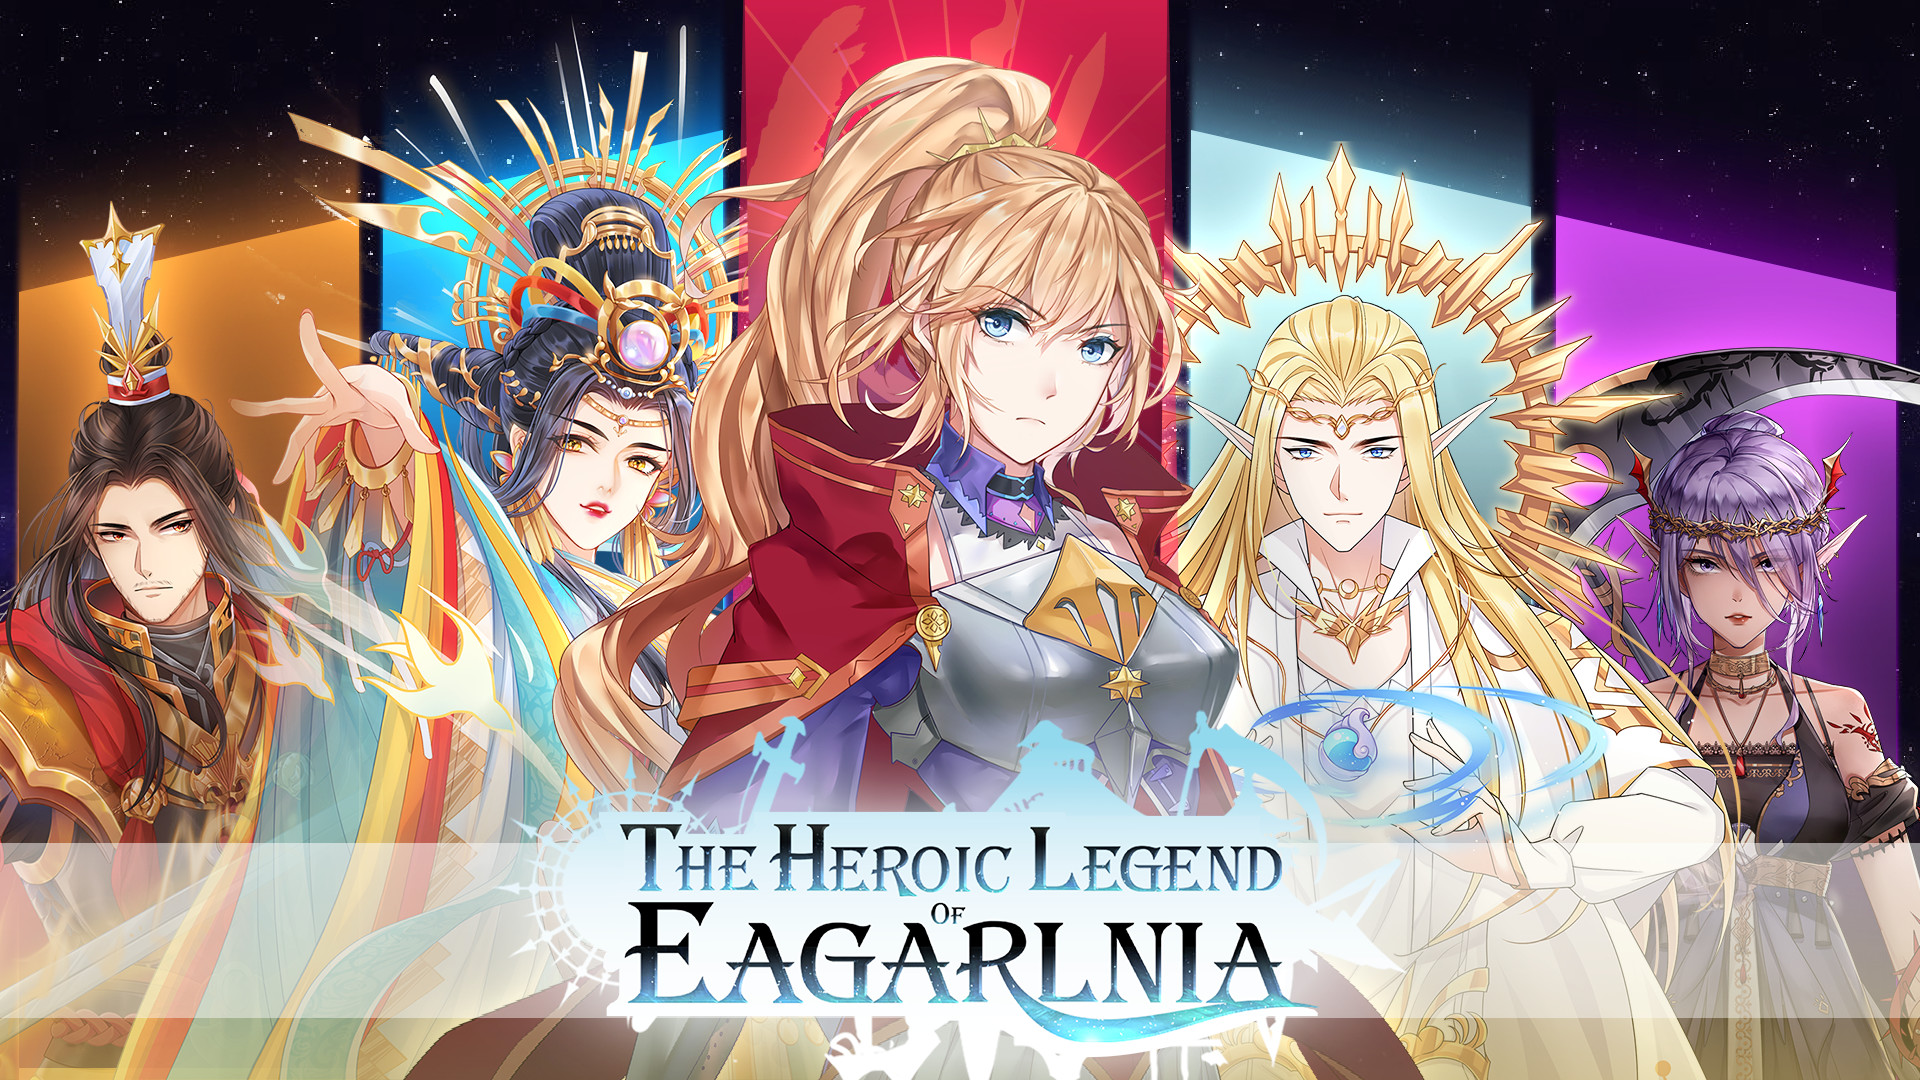 Find the best laptops for The Heroic Legend of Eagarlnia